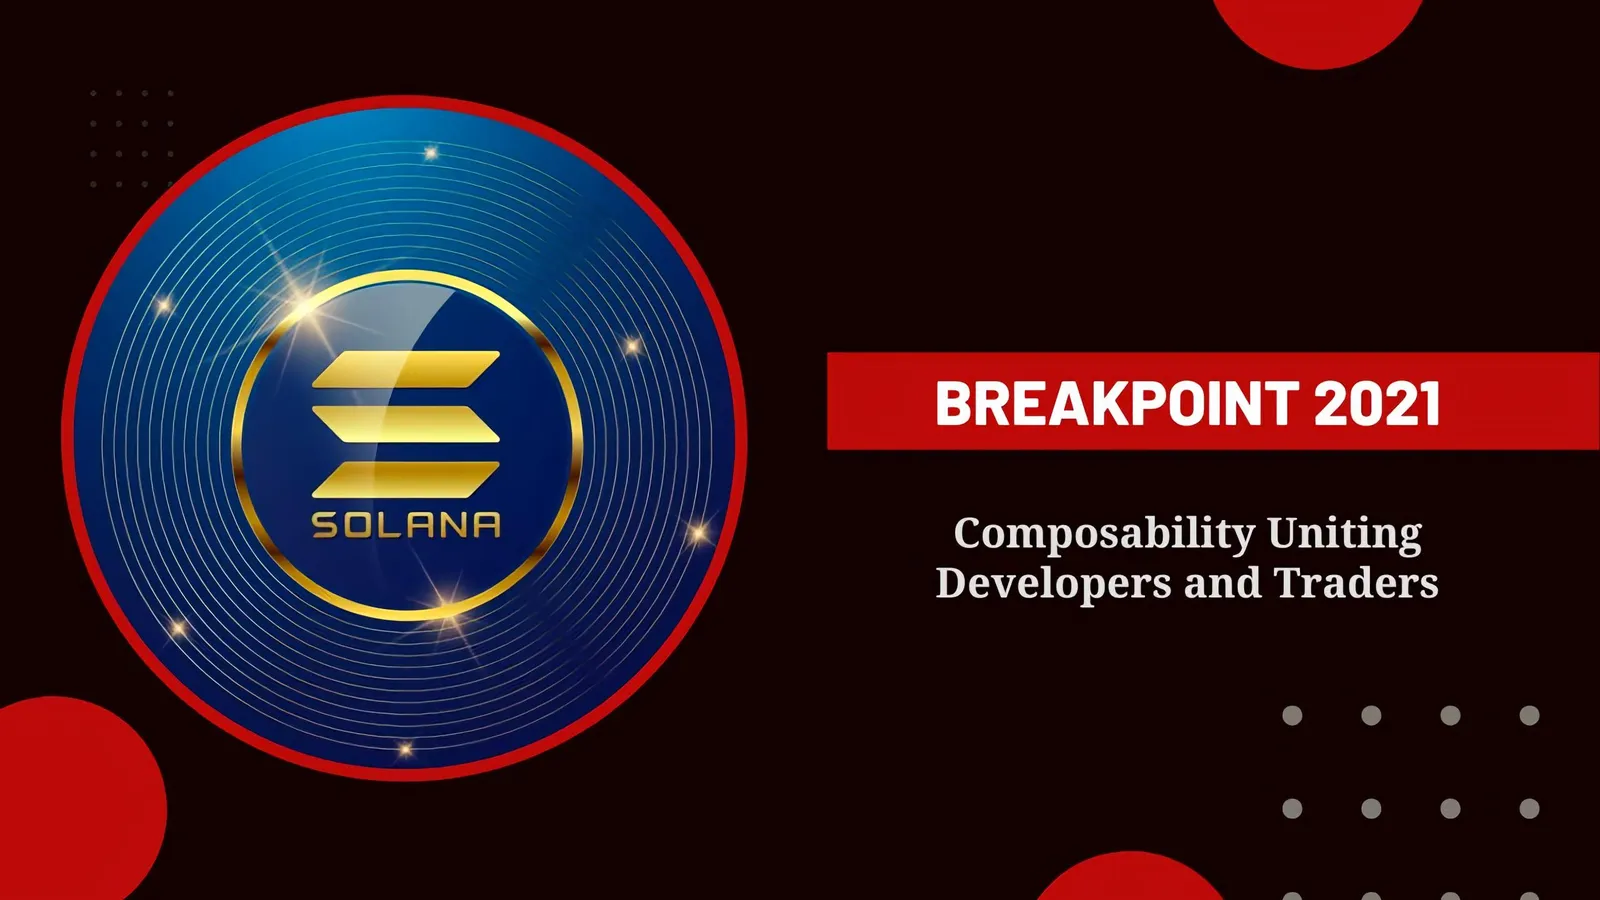 Composability Uniting Developers and Traders at Breakpoint 2021